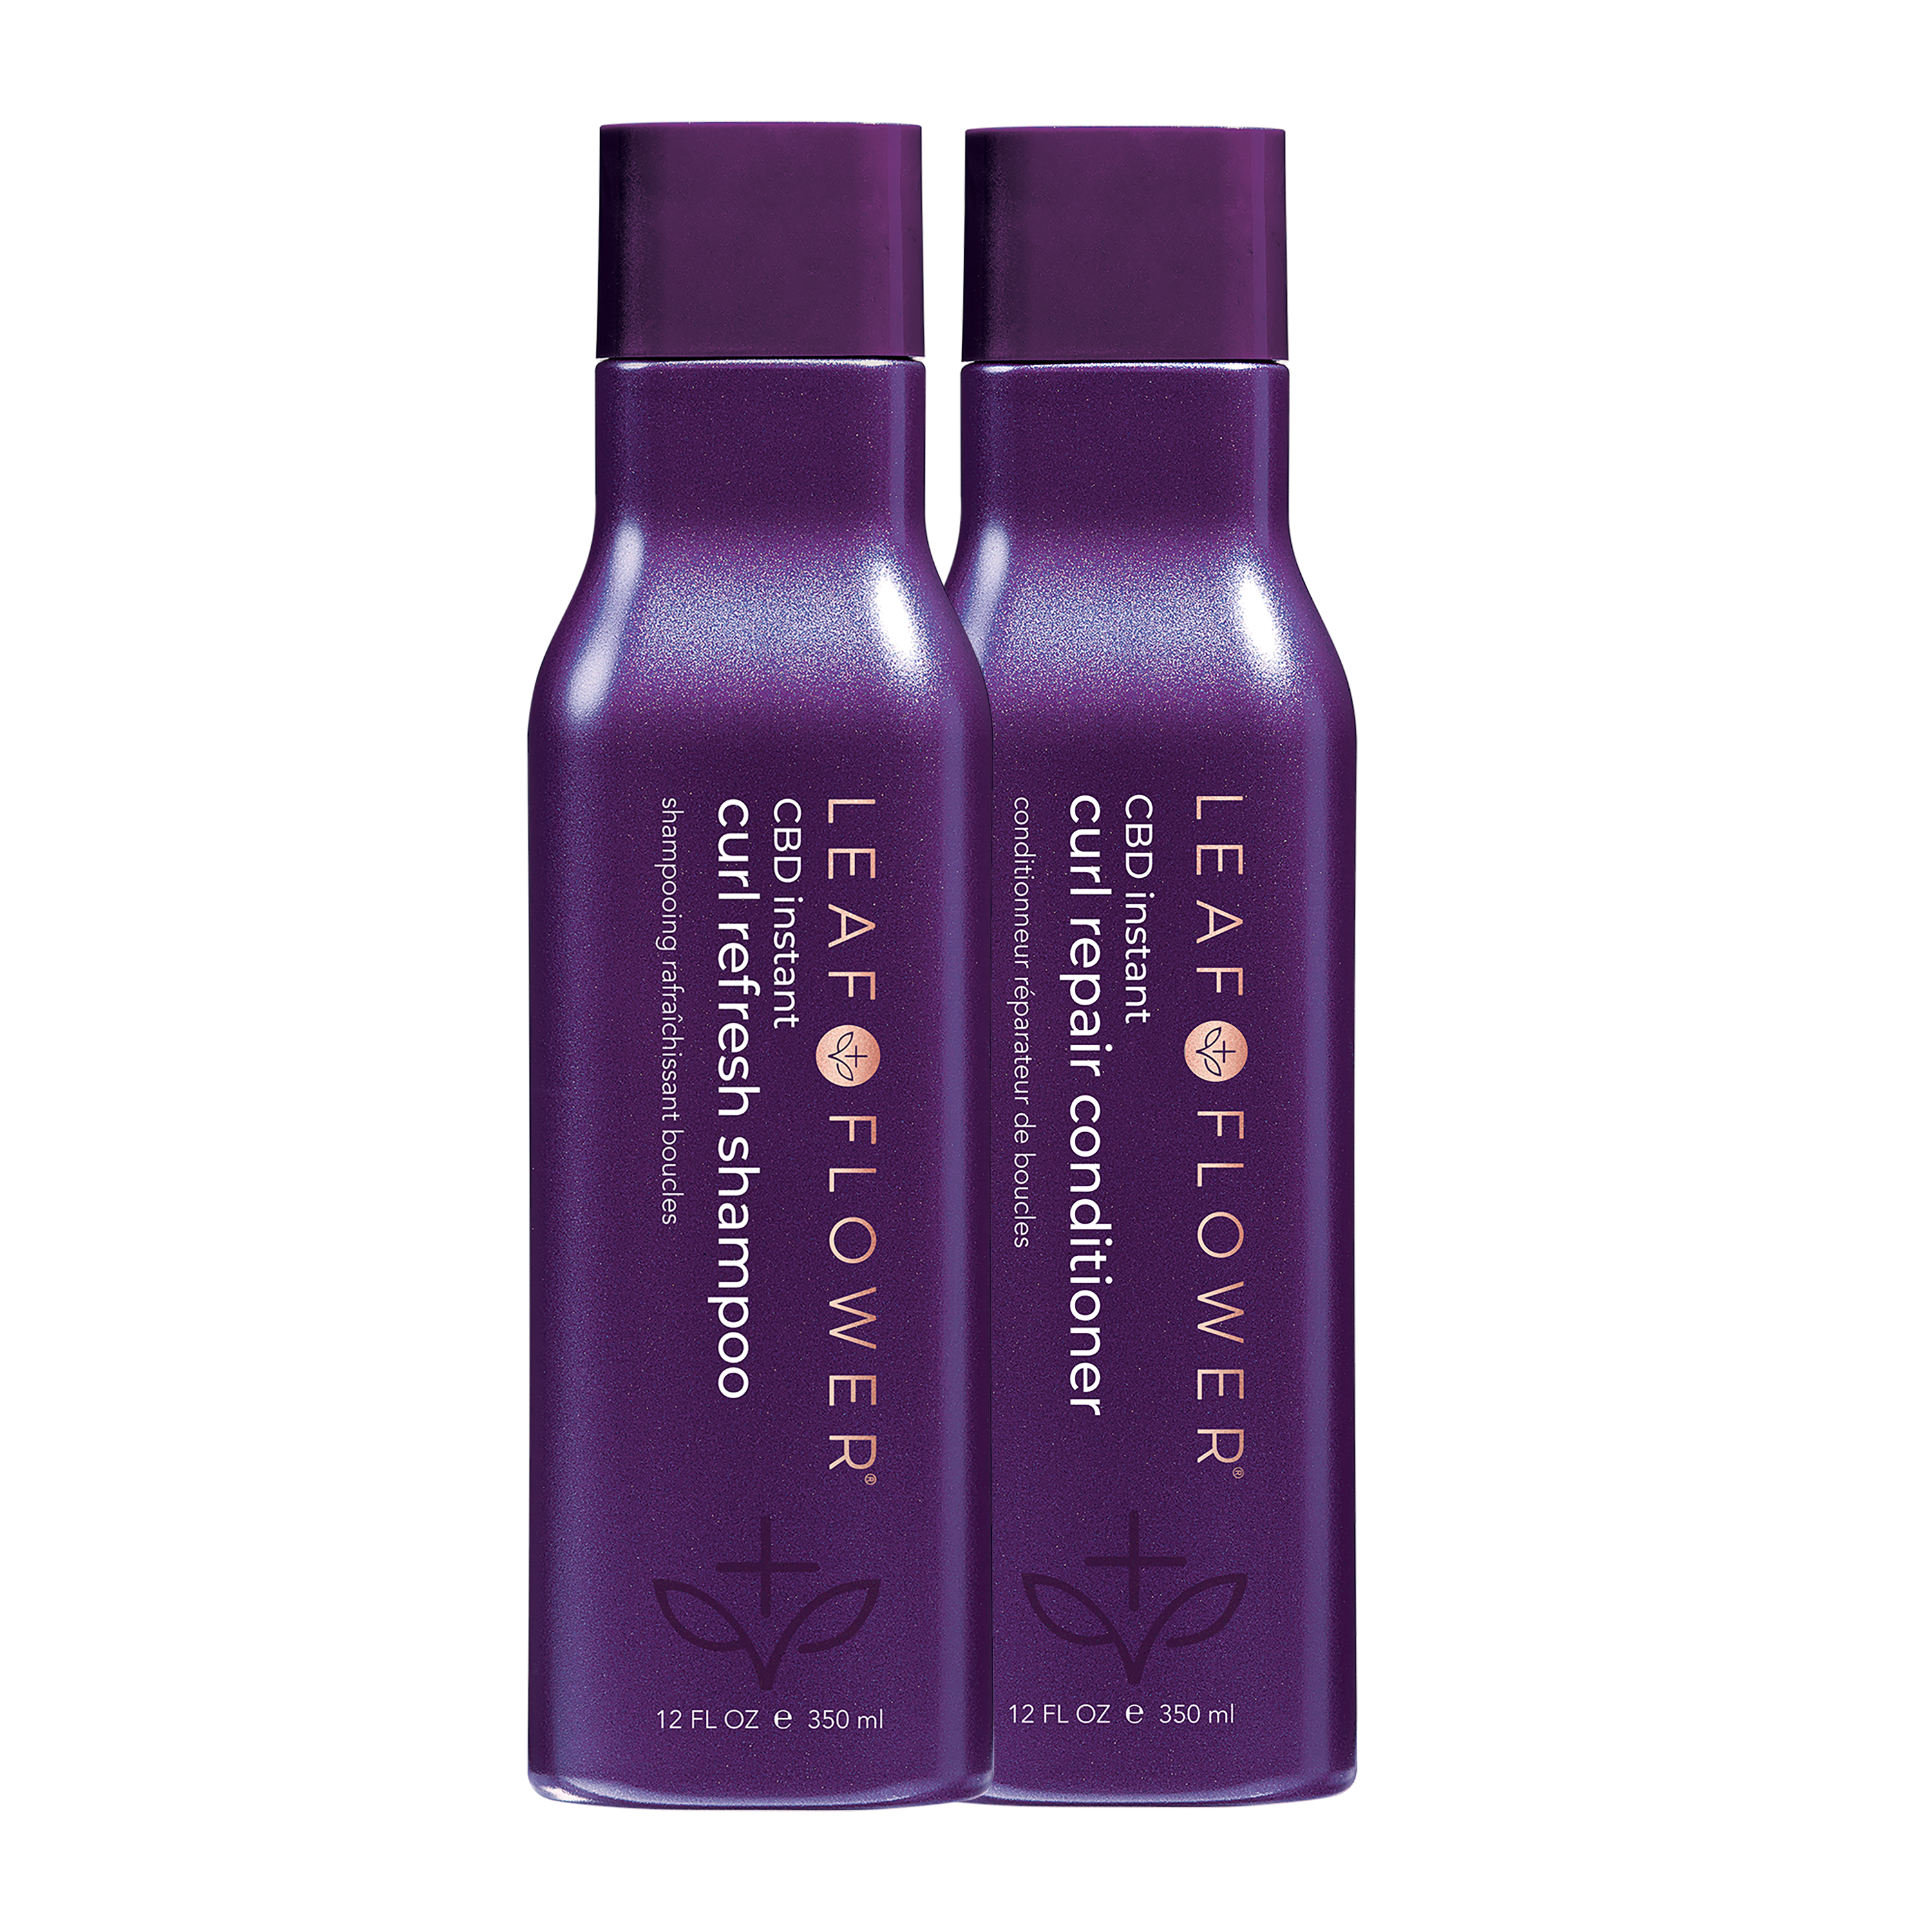 CBD Curl Shampoo/Conditioner Duo – Leaf and Flower: